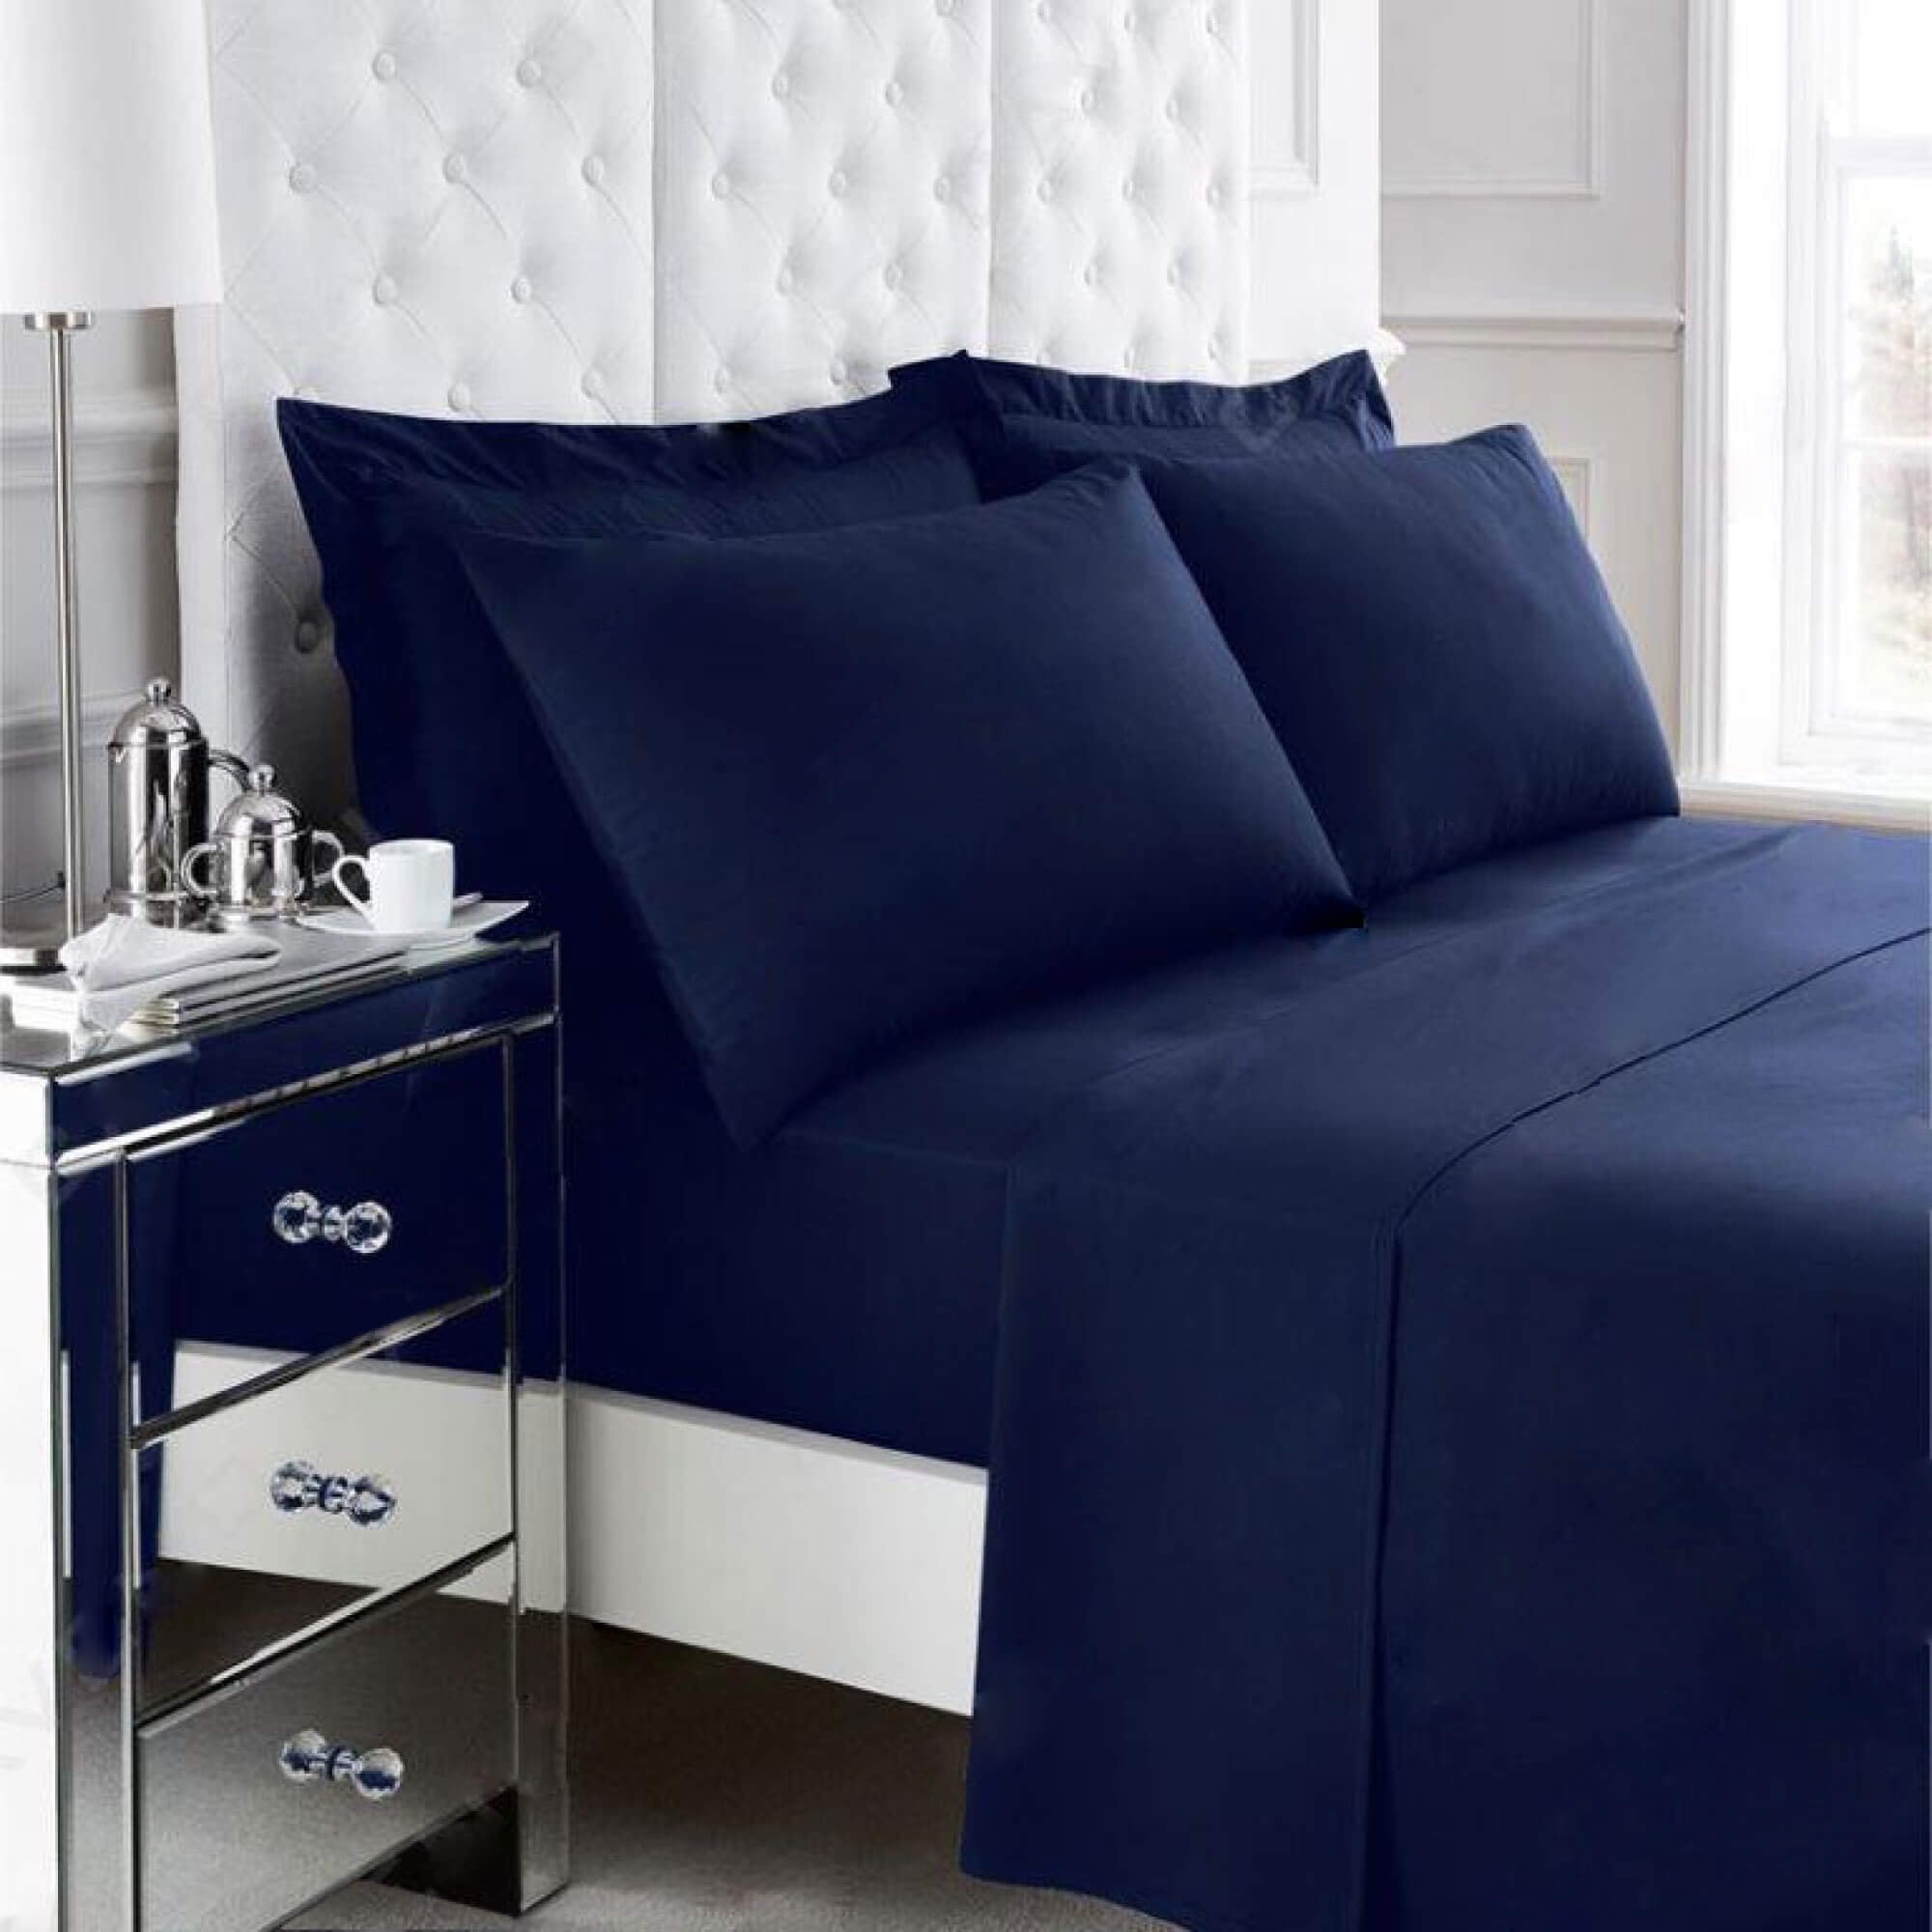 Non Iron Percale Bedding Sheet Range - Navy - King Fitted - TJ Hughes